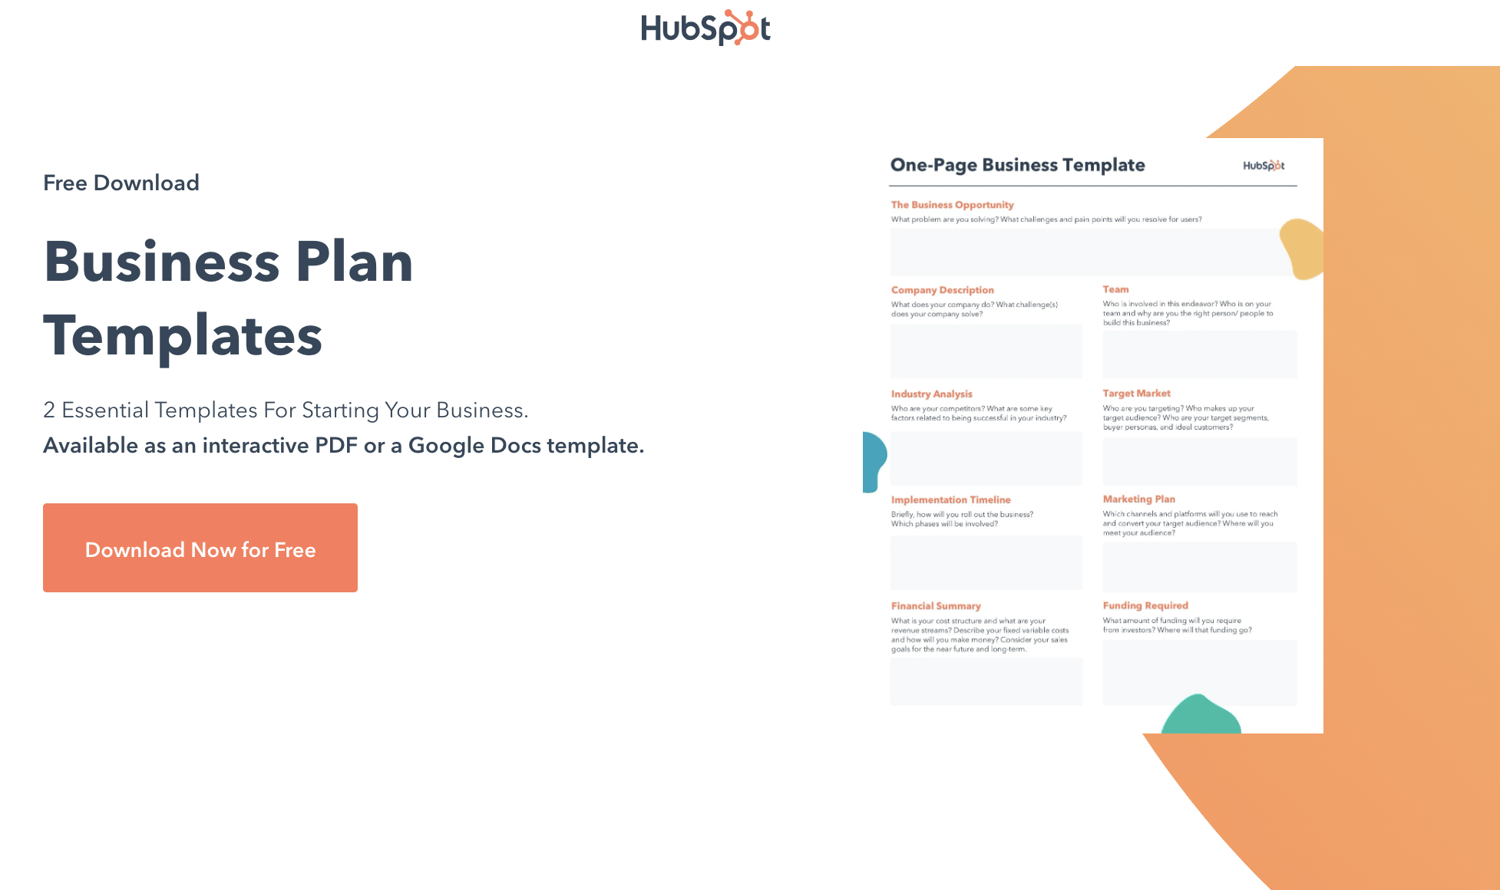 26 Sample Business Plans to Help You Write Your Own